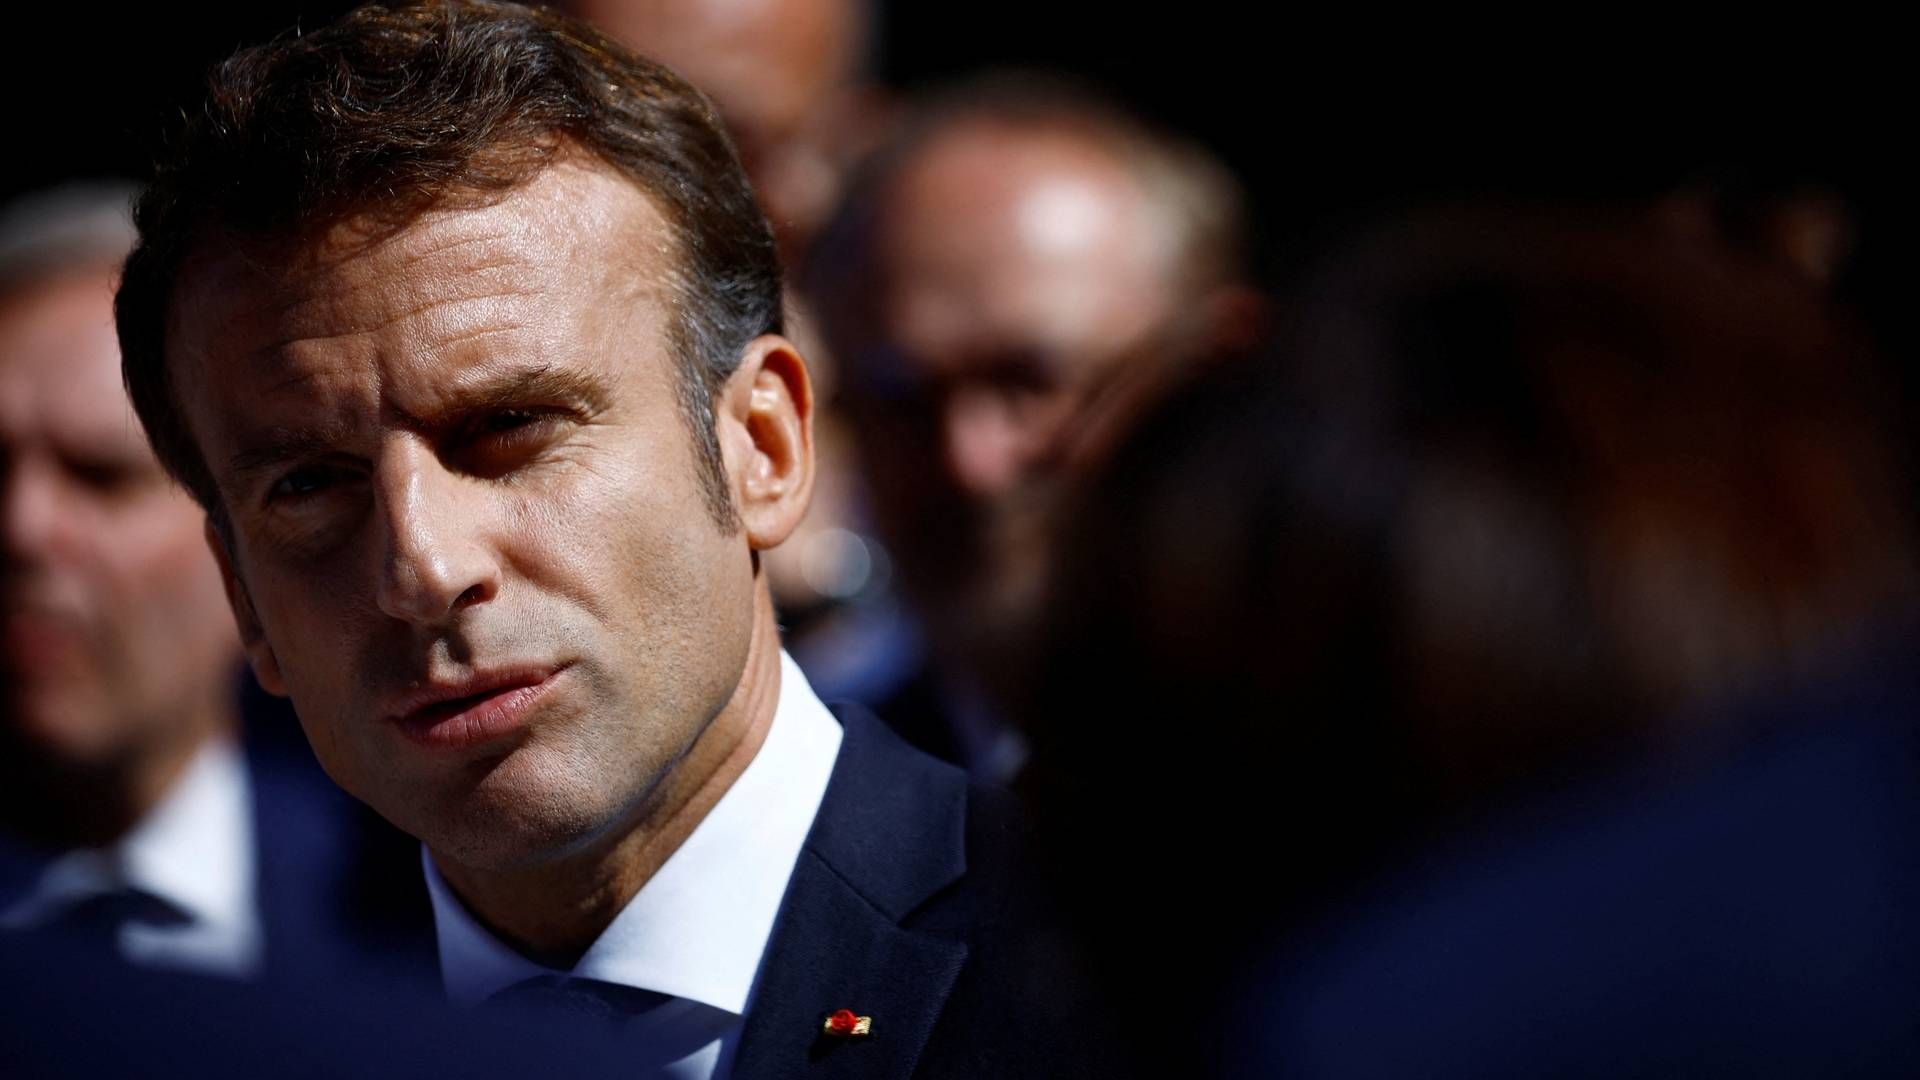 French President Emmanuel Macron sees no reason to revive plans for a new gas pipeline linking Spain and France. | Photo: Stephane Mahe/AFP / POOL